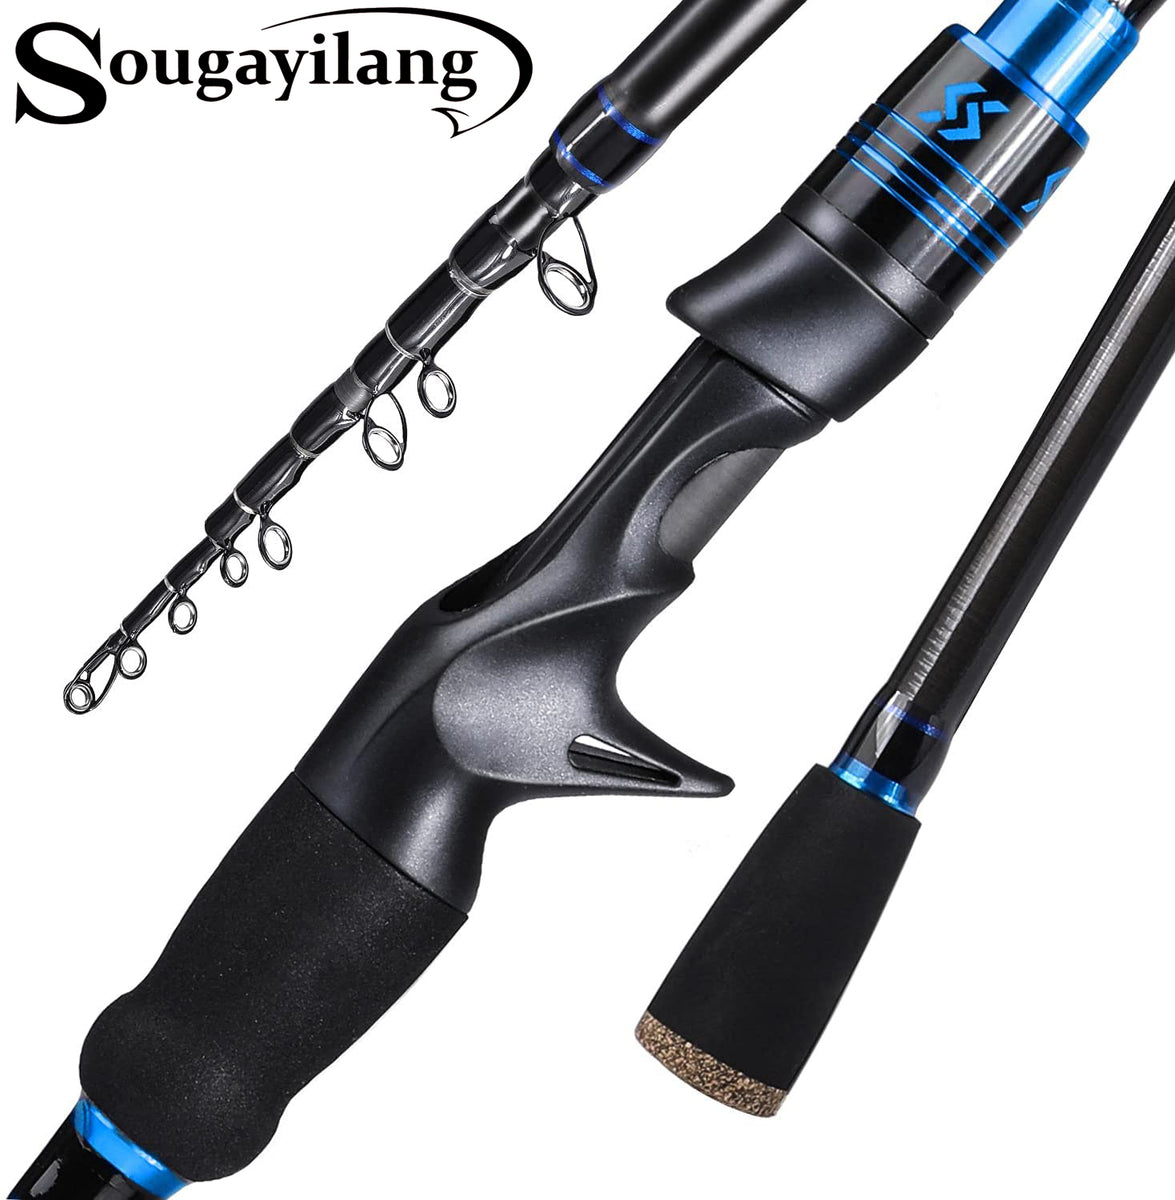 Sougayilang Telescopic Fishing Rod, Carbon Fiber Spinning & Casting Rod,  Lightweight Fishing Pole Designed for Bass, Trout, Salmon, Steelhead, for